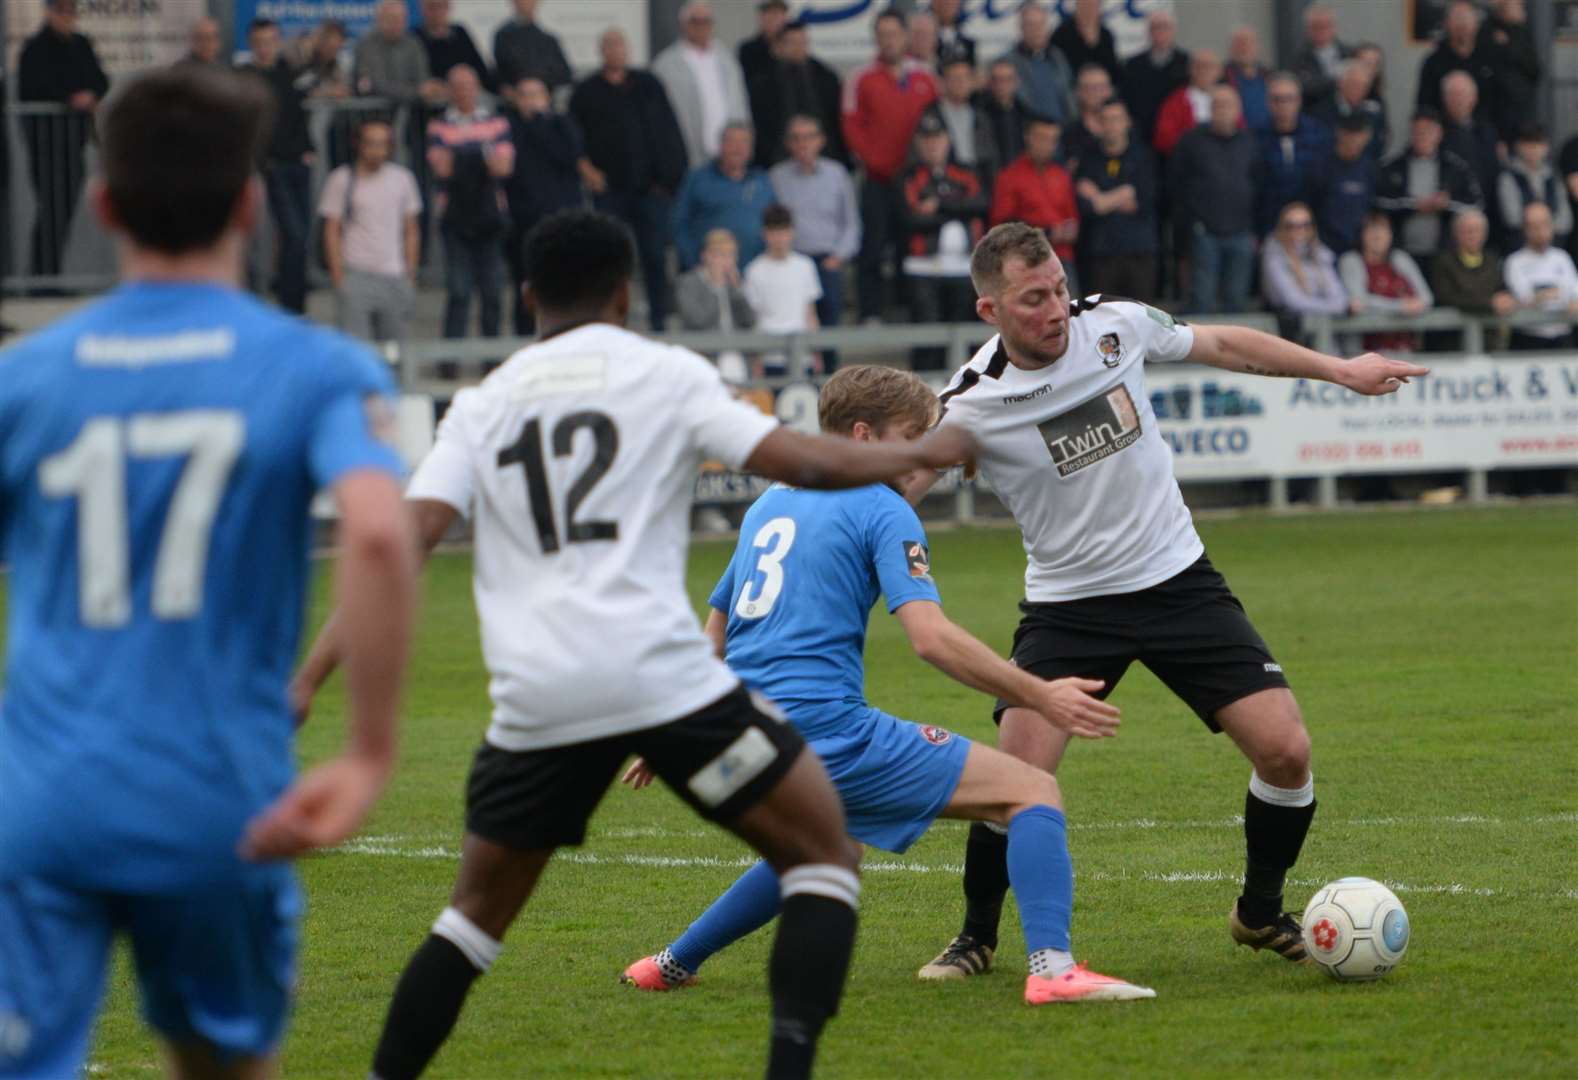 Dartford's Ryan Hayes tries to find a way through the Truro defence Picture: Chris Davey